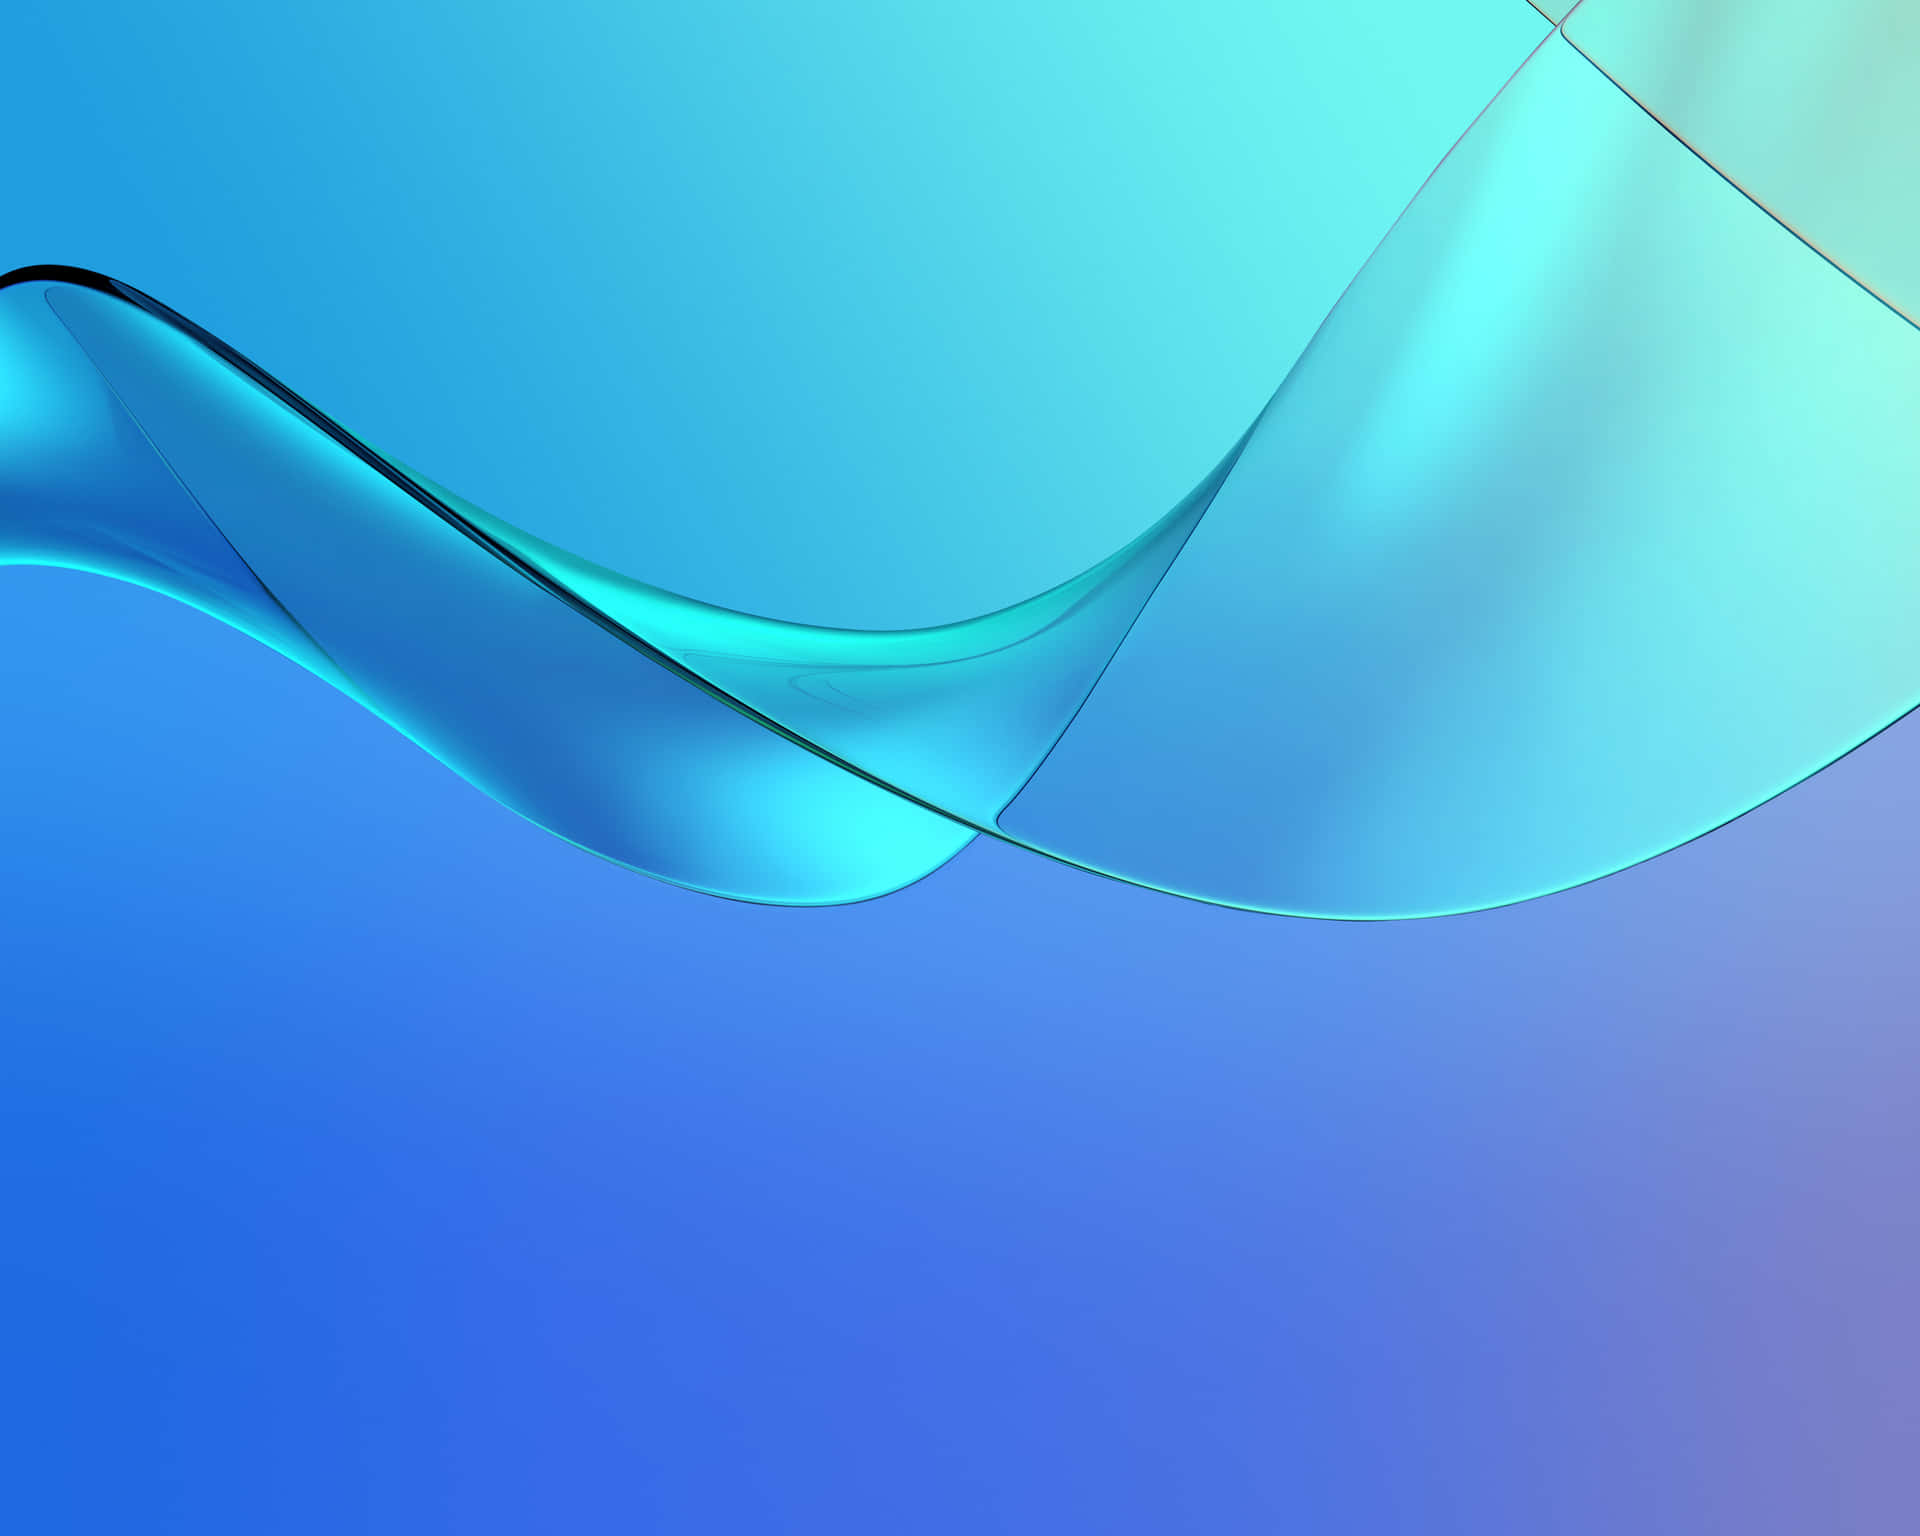 A deep blue background of overlapping gradients